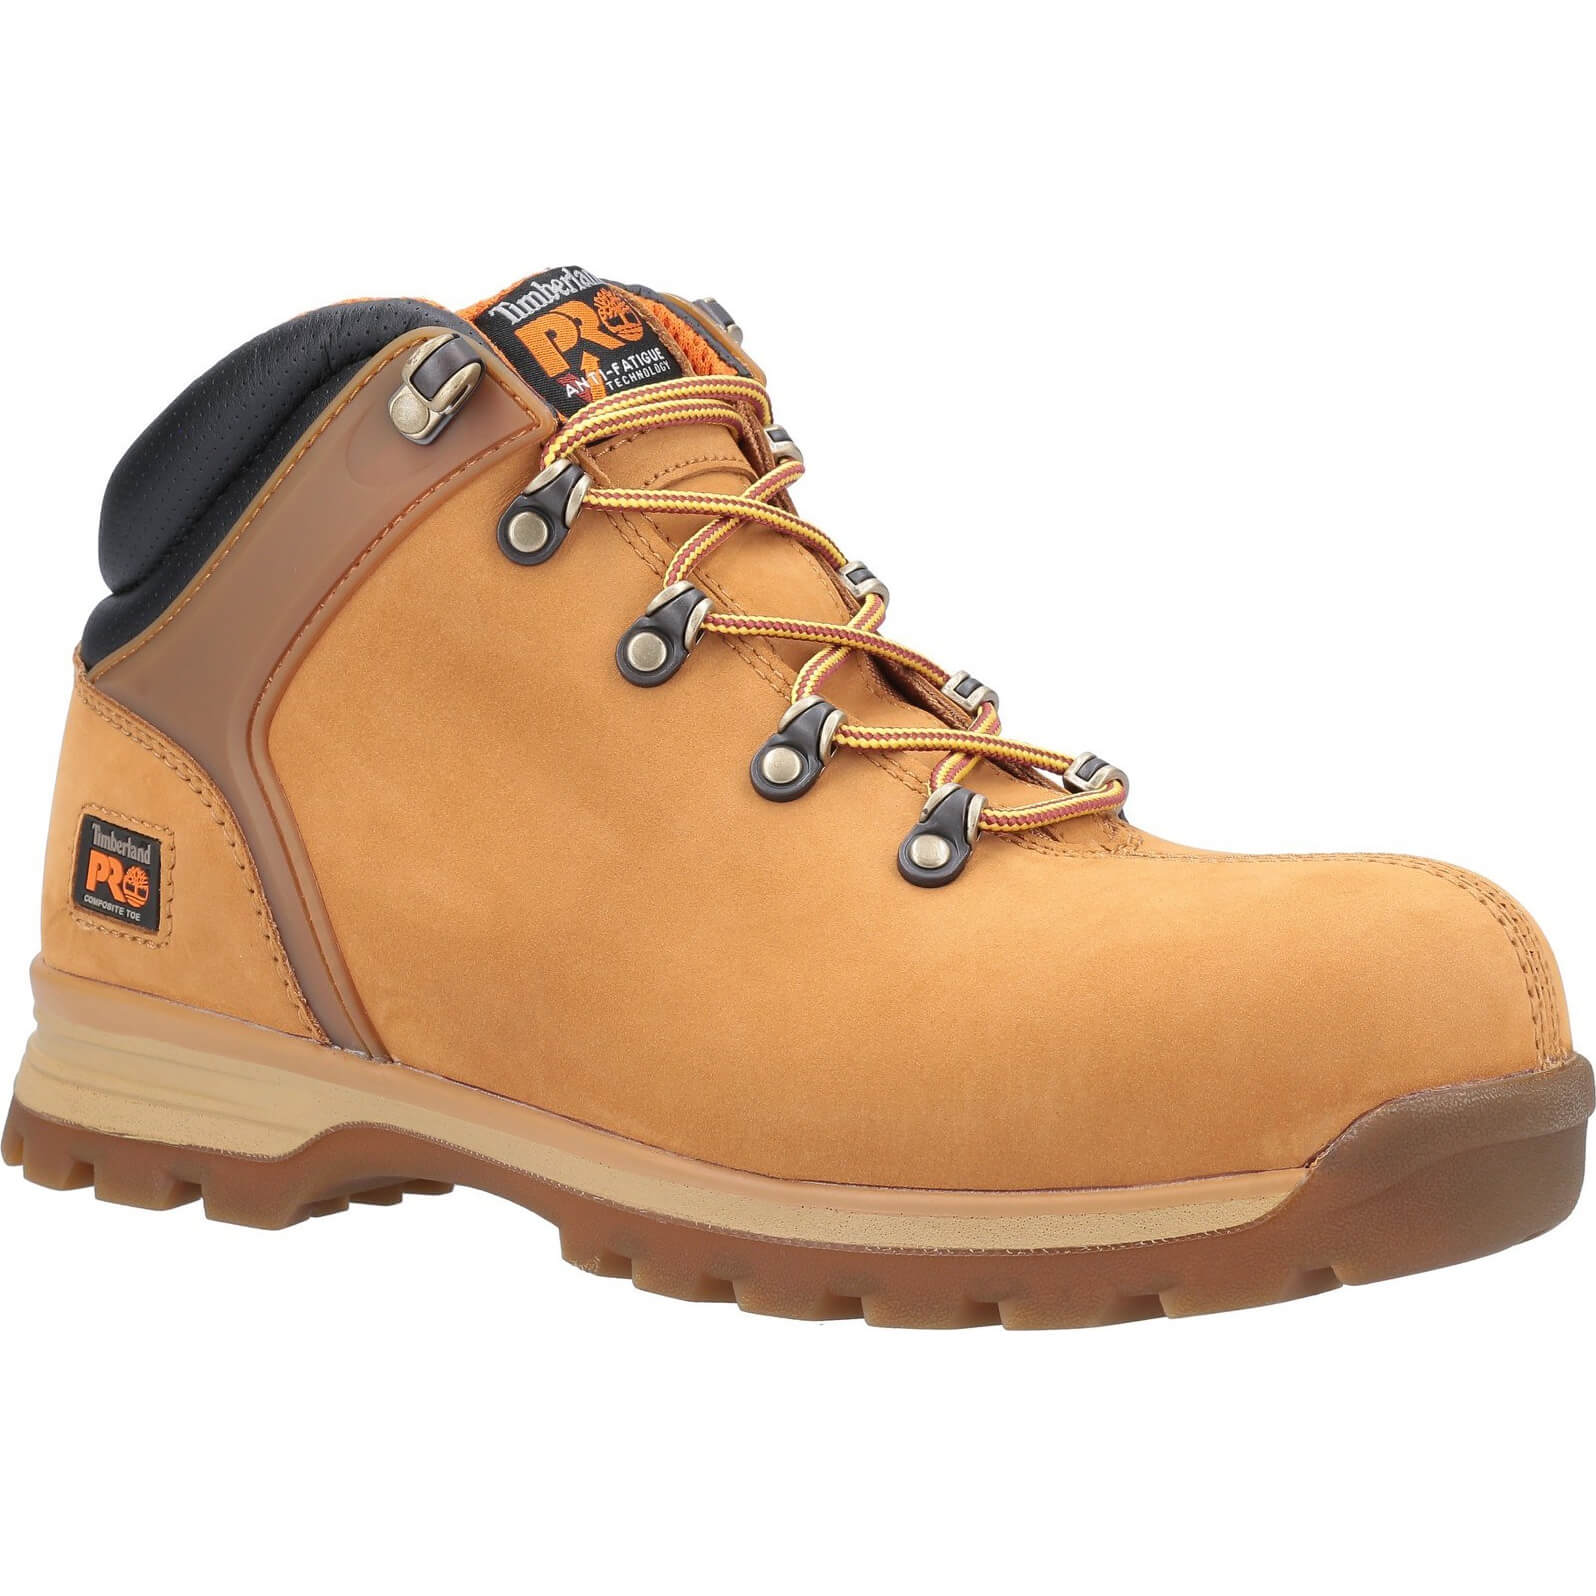 Image of Timberland Pro Splitrock XT Composite Safety Toe Work Boot Wheat Size 10.5